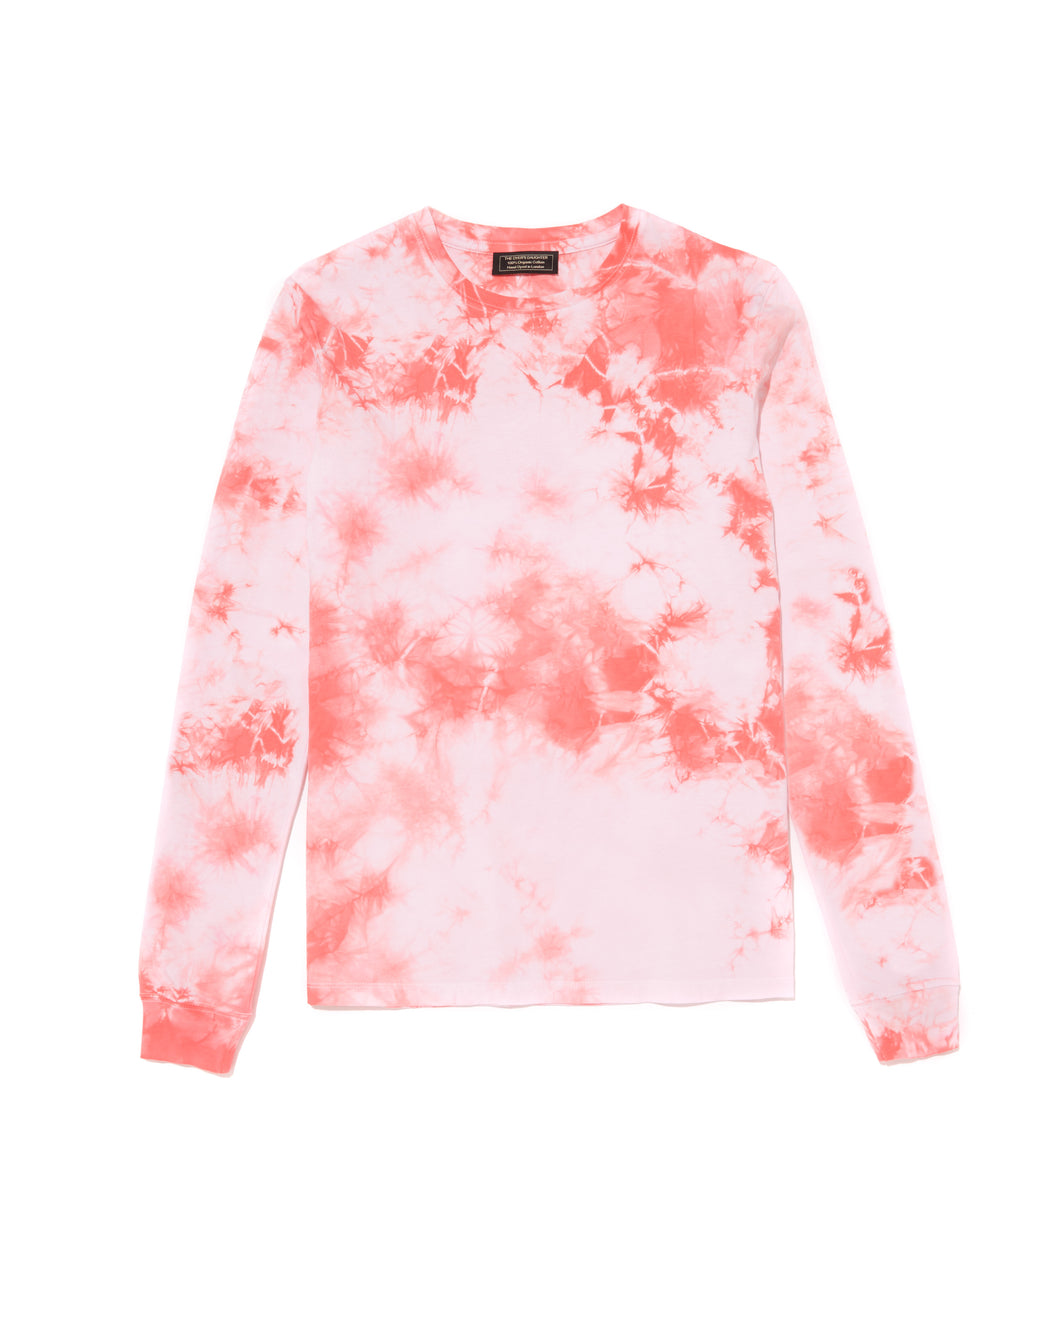 WATERMELON Premium Organic Long Sleeved Hand-Dyed Top